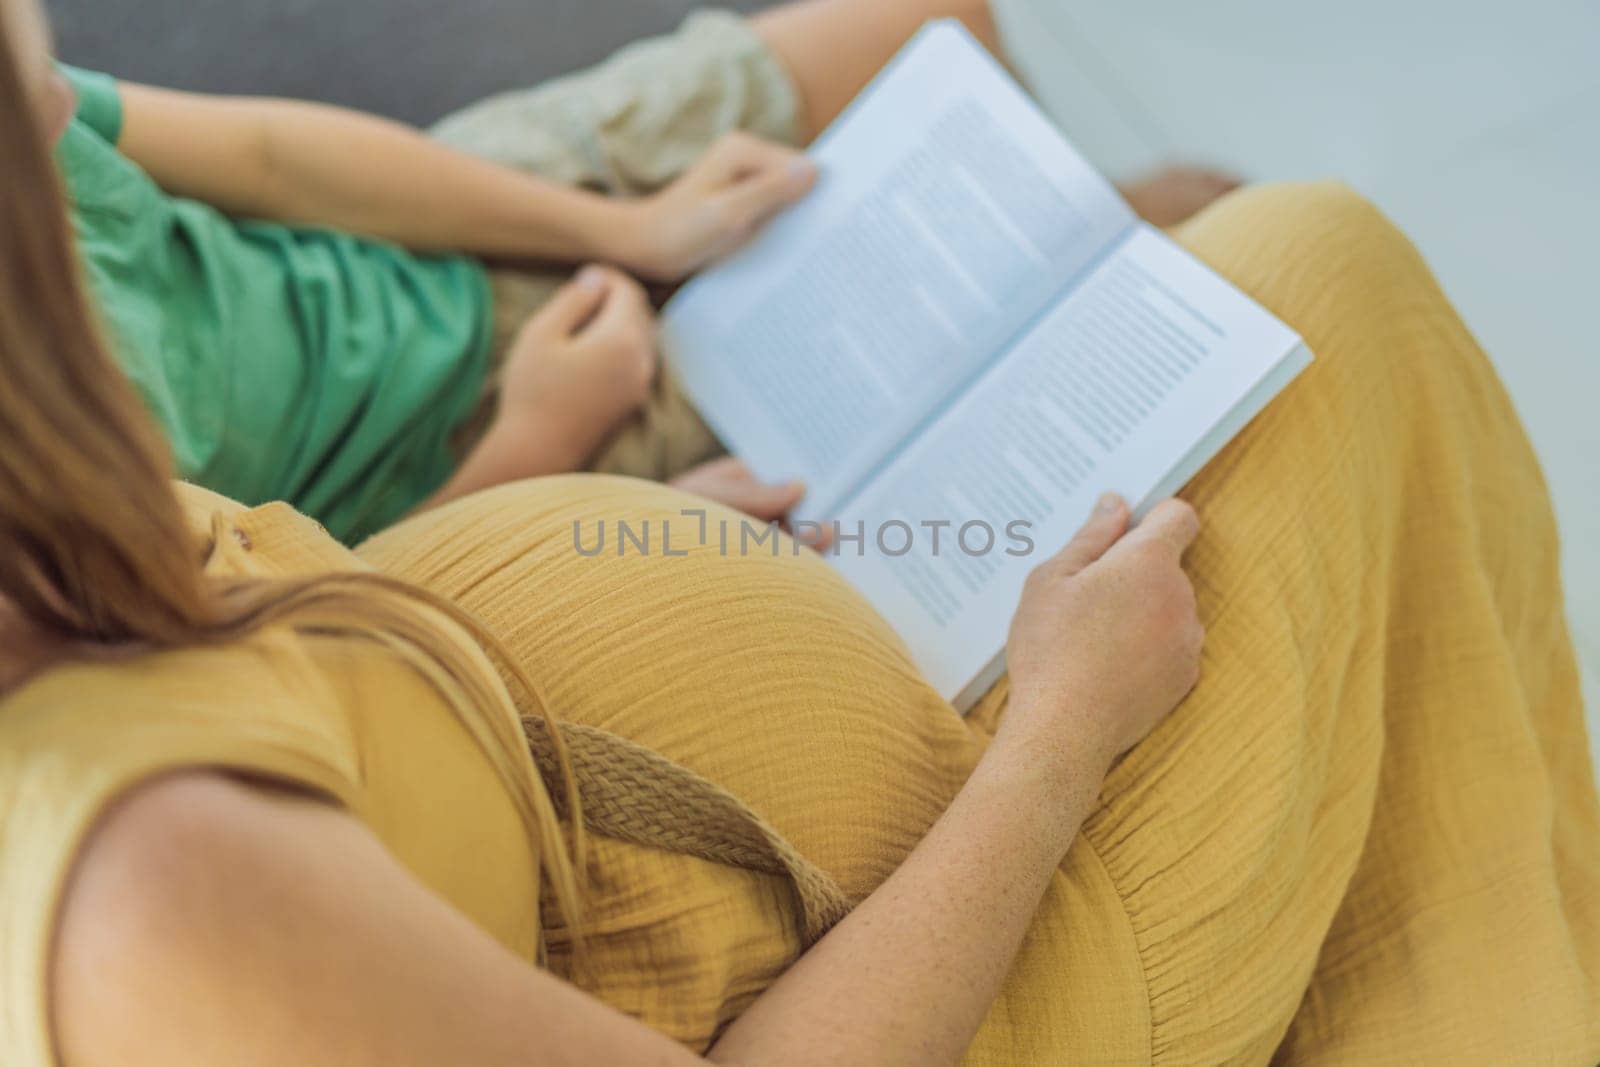 Sweet and bonding moment as a pregnant mother and her son share quality time, immersed in a book, creating cherished memories through the joy of reading together.